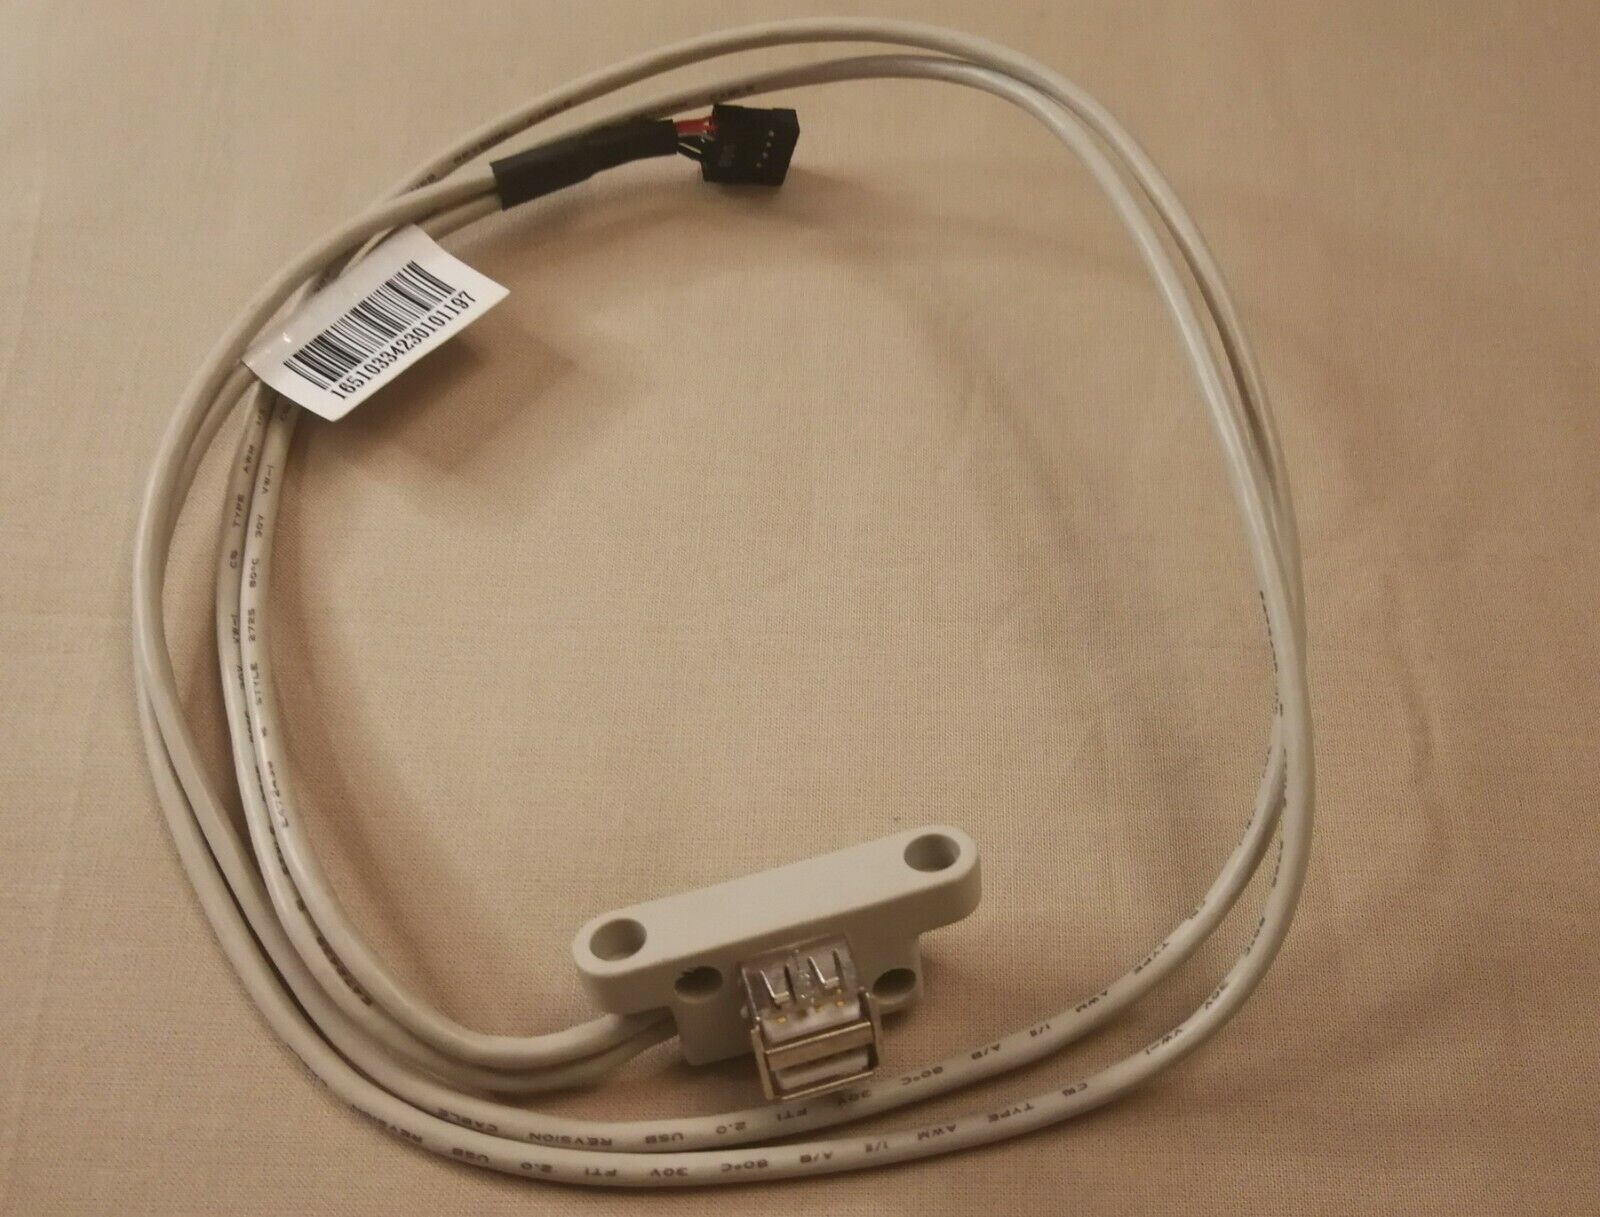 New USB2.0 cable replacement 26H03342301B0 for Chenbro RM423/RM413 chassis, 1 pc